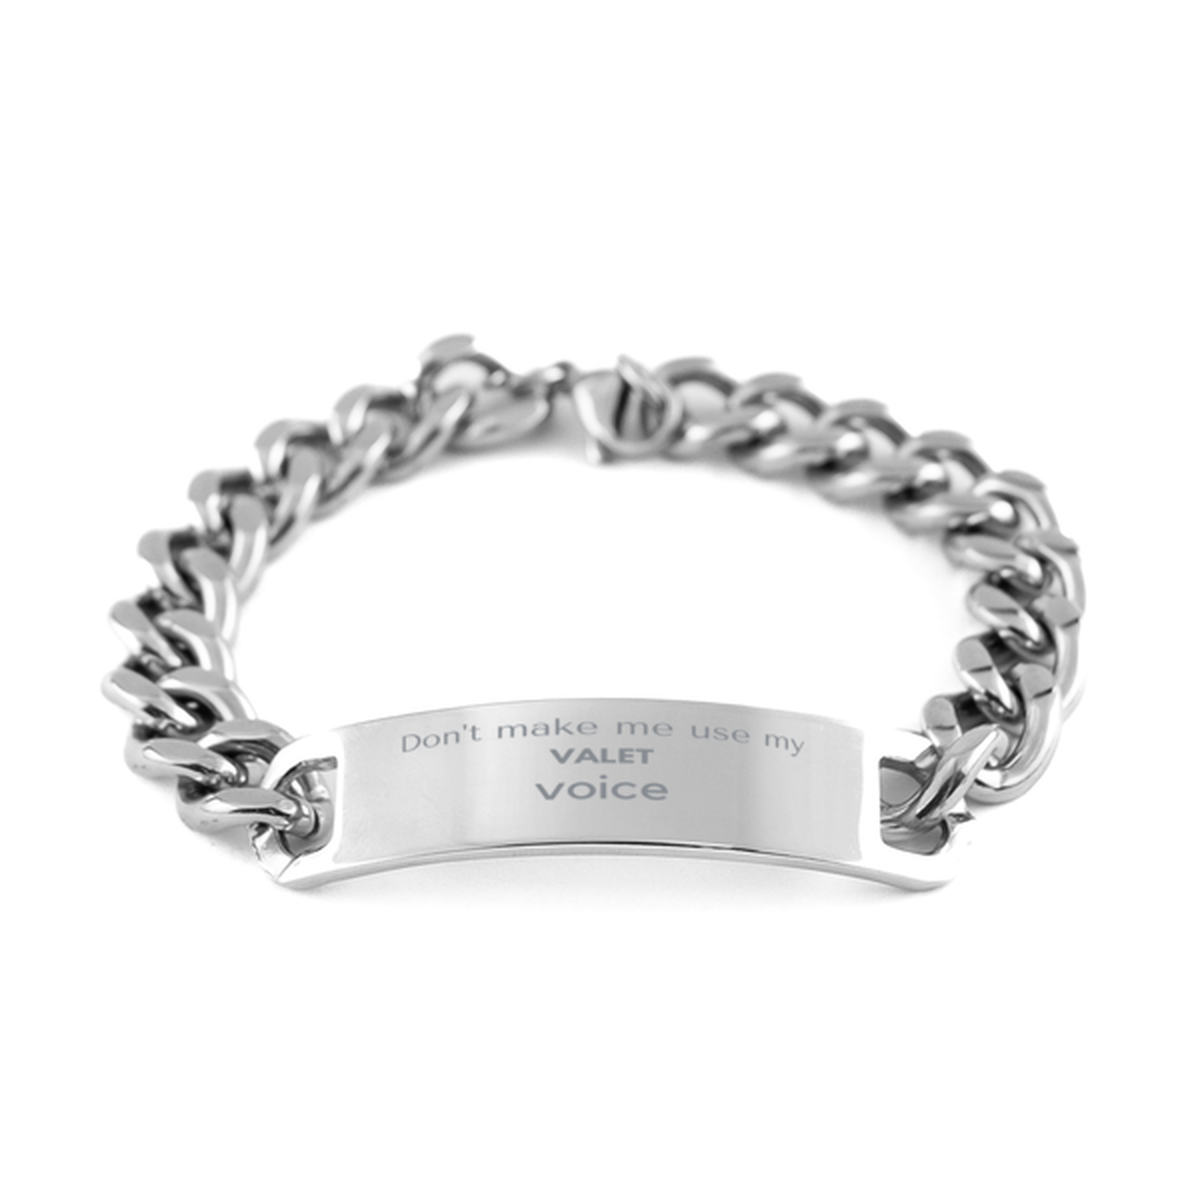 Don't make me use my Valet voice, Sarcasm Valet Gifts, Christmas Valet Cuban Chain Stainless Steel Bracelet Birthday Unique Gifts For Valet Coworkers, Men, Women, Colleague, Friends